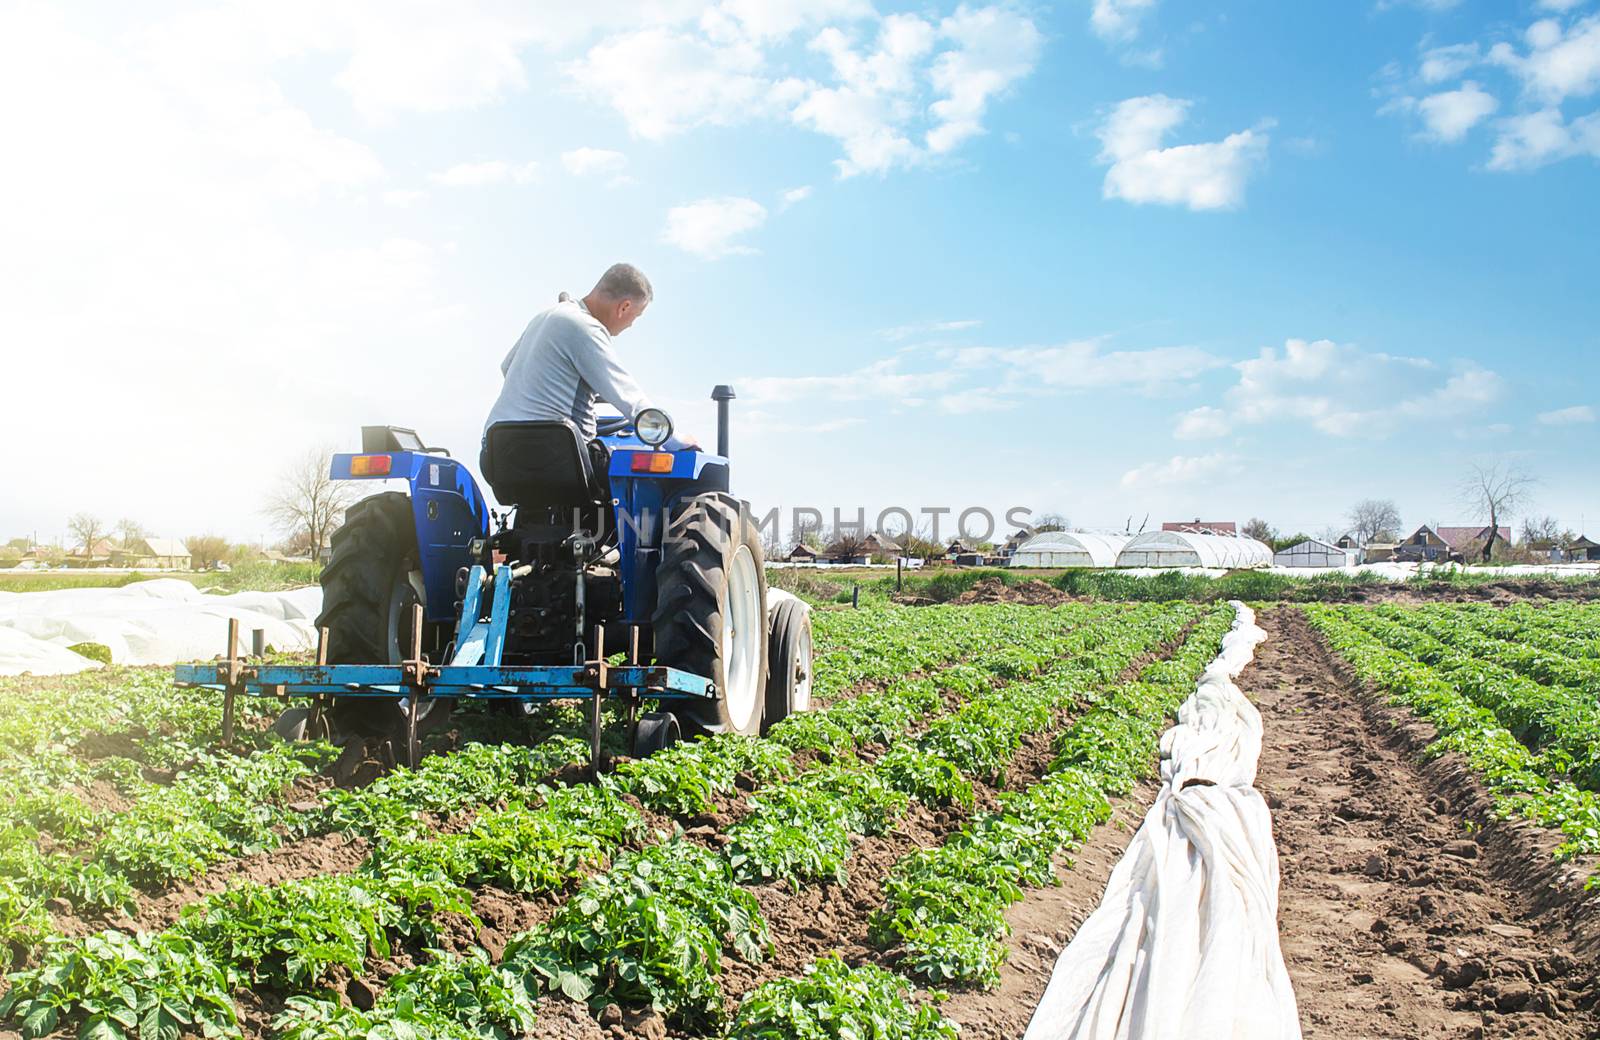 A farmer drives a tractor across the potato plantation field. Improving quality of ground to allow water and nitrogen air to pass through to roots. Crop care. Farming agricultural industry